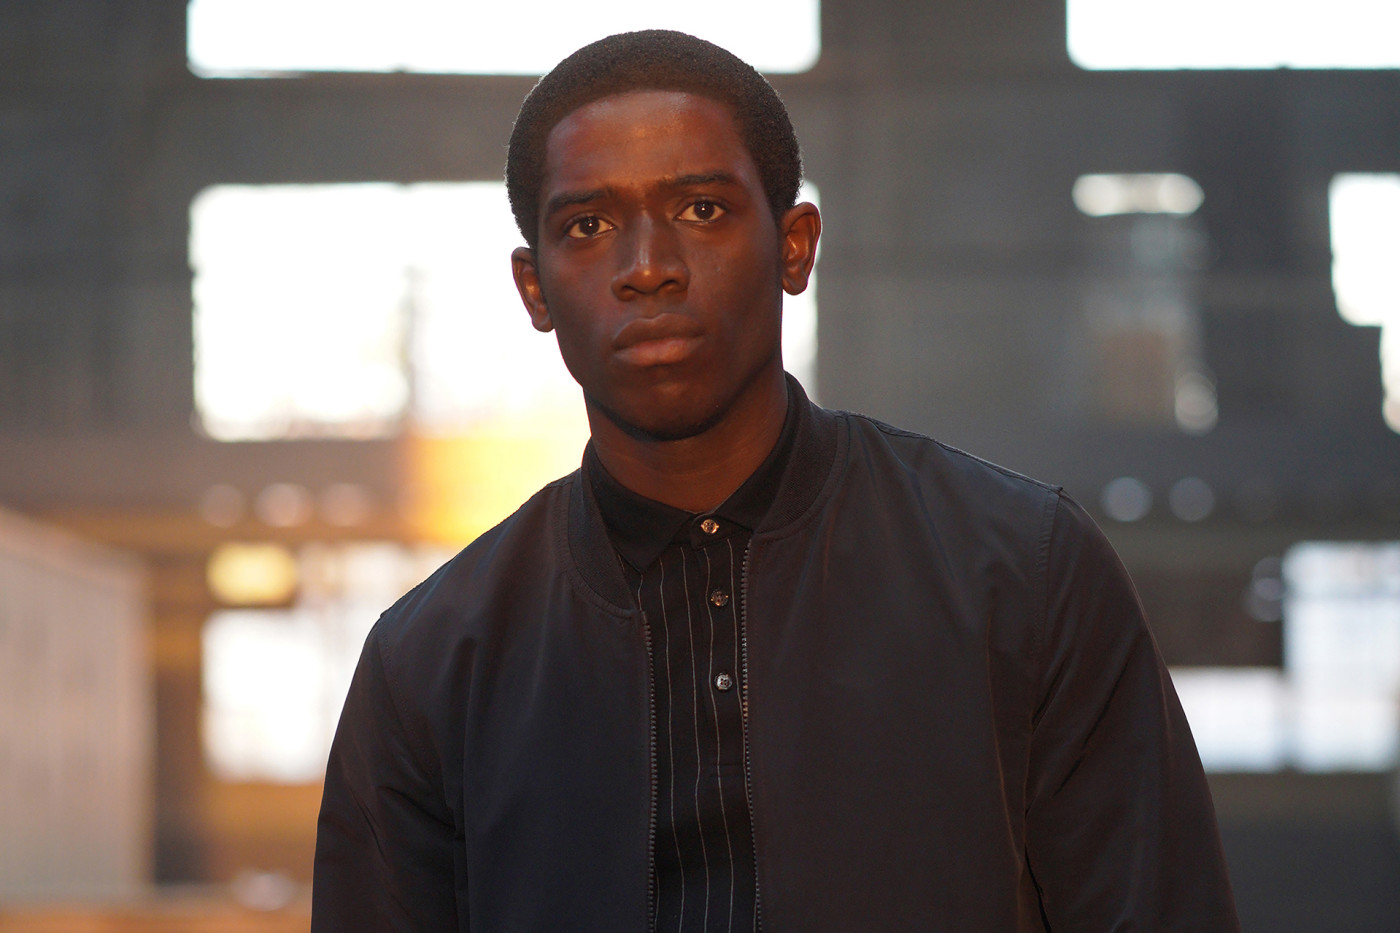 ‘Snowfall’ Star Damson Idris Says the FX Crime Drama Has the Viewer ‘By the Throat’